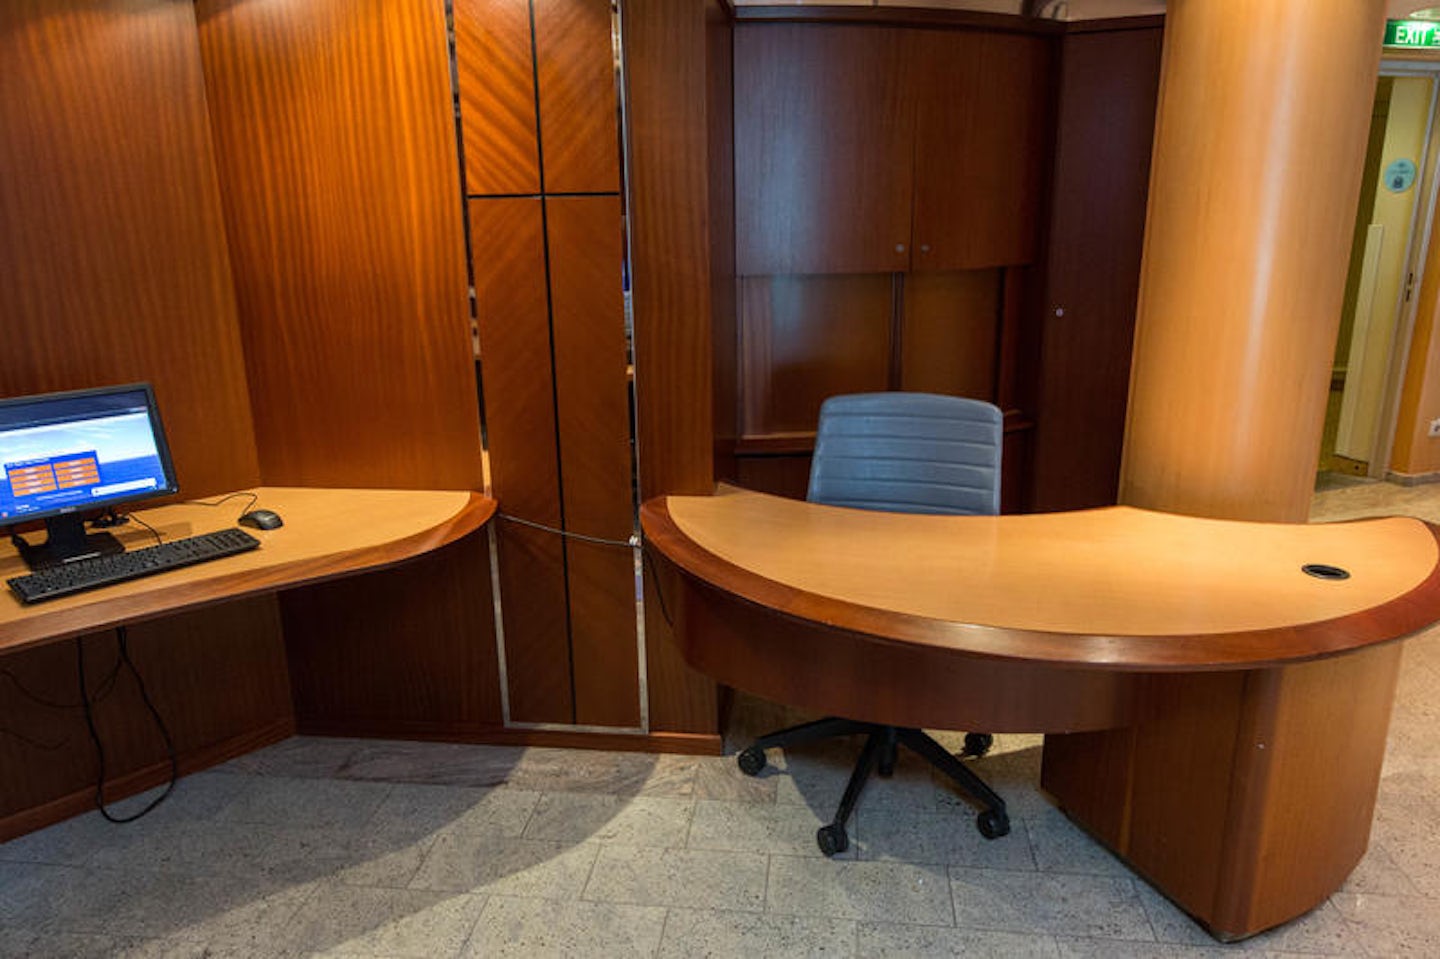 Business Services on Radiance of the Seas